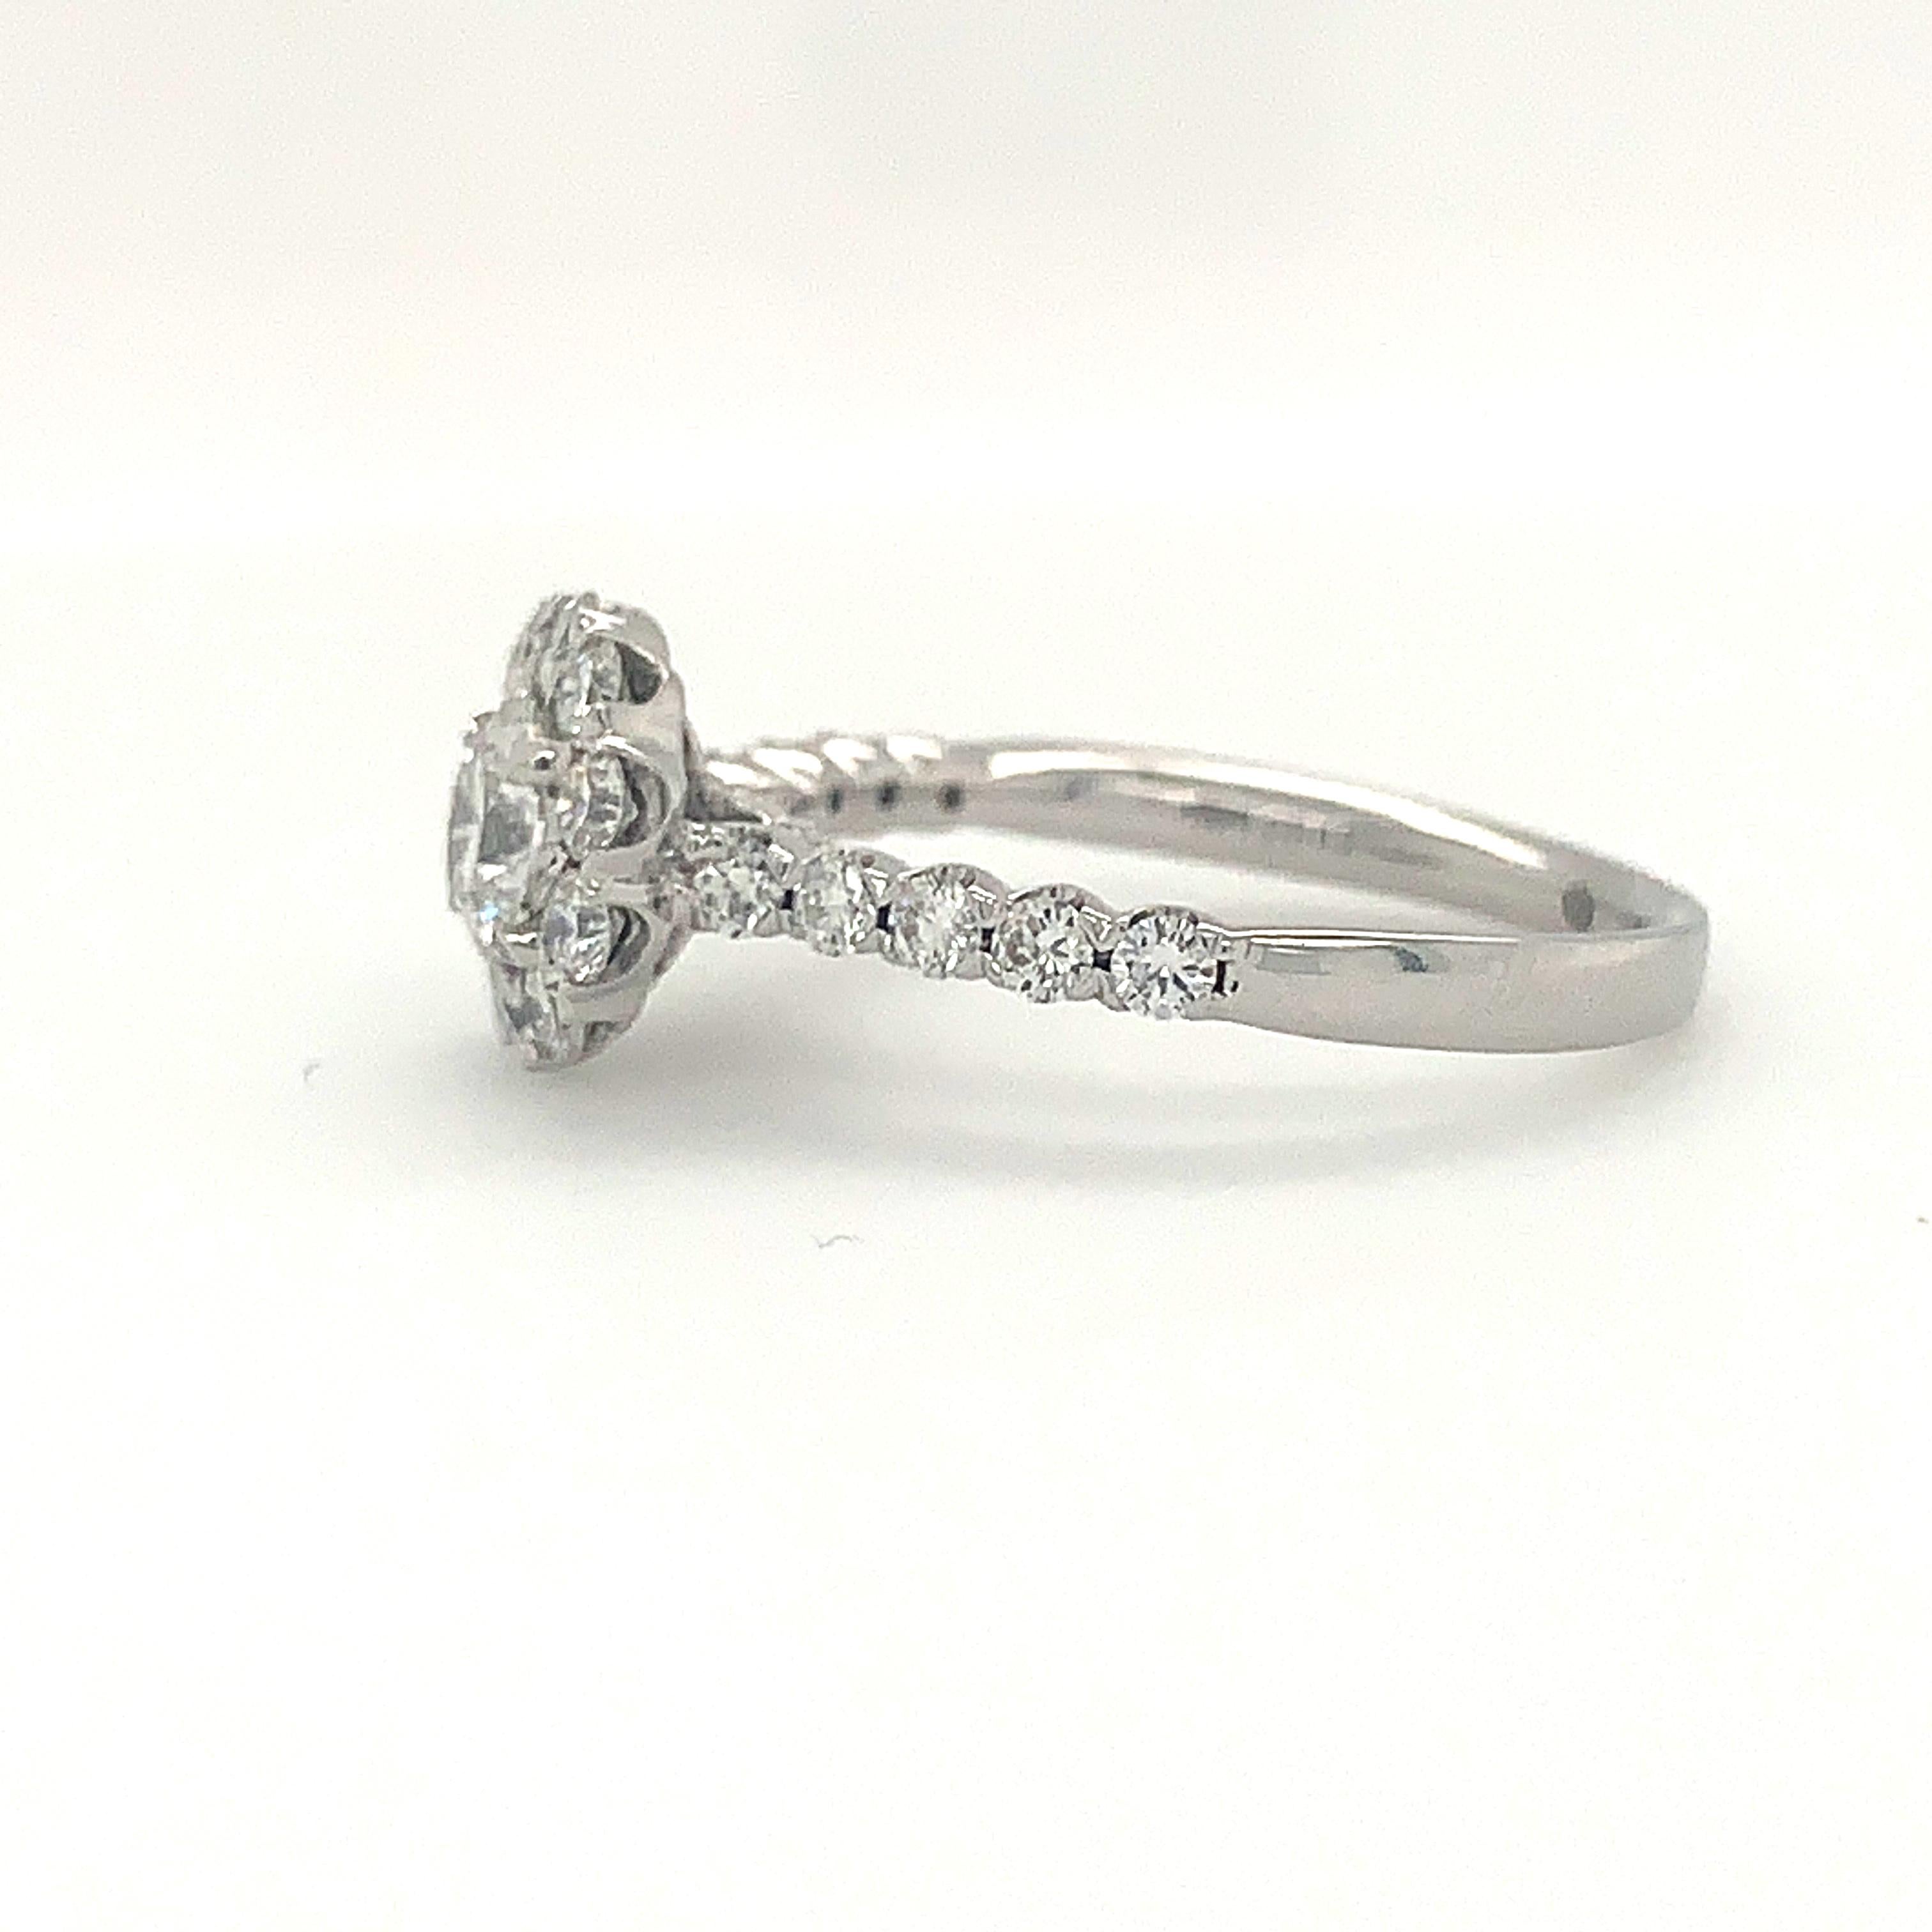 Boasting a magnificent design of 29 Round Brilliant Diamonds with a total carat weight of 0.75cts, the Christopher Designs Crisscut® Round Halo Diamond Engagement Ring in 18K White Gold also features a stunning modified brilliant Crisscut® in the